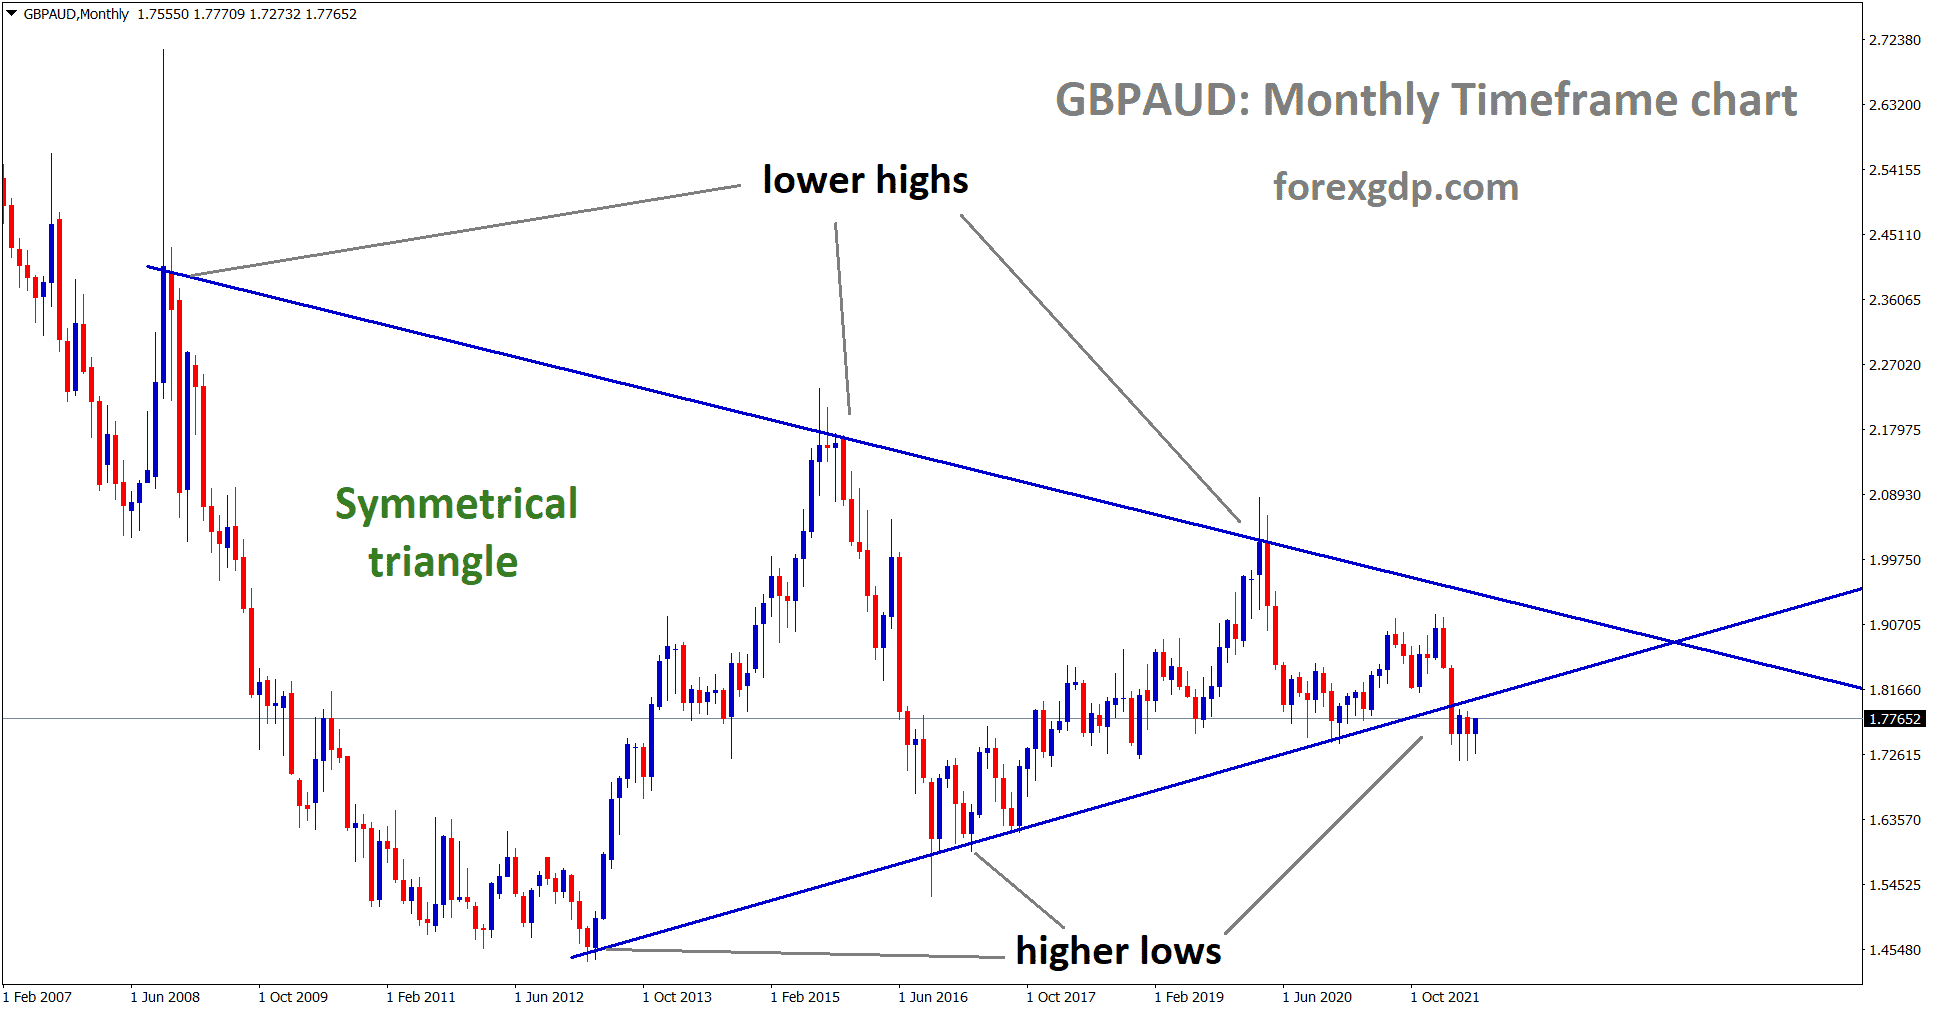 GBPAUD is moving in symmetrical triangle and the market has reached the higher low area of the pattern